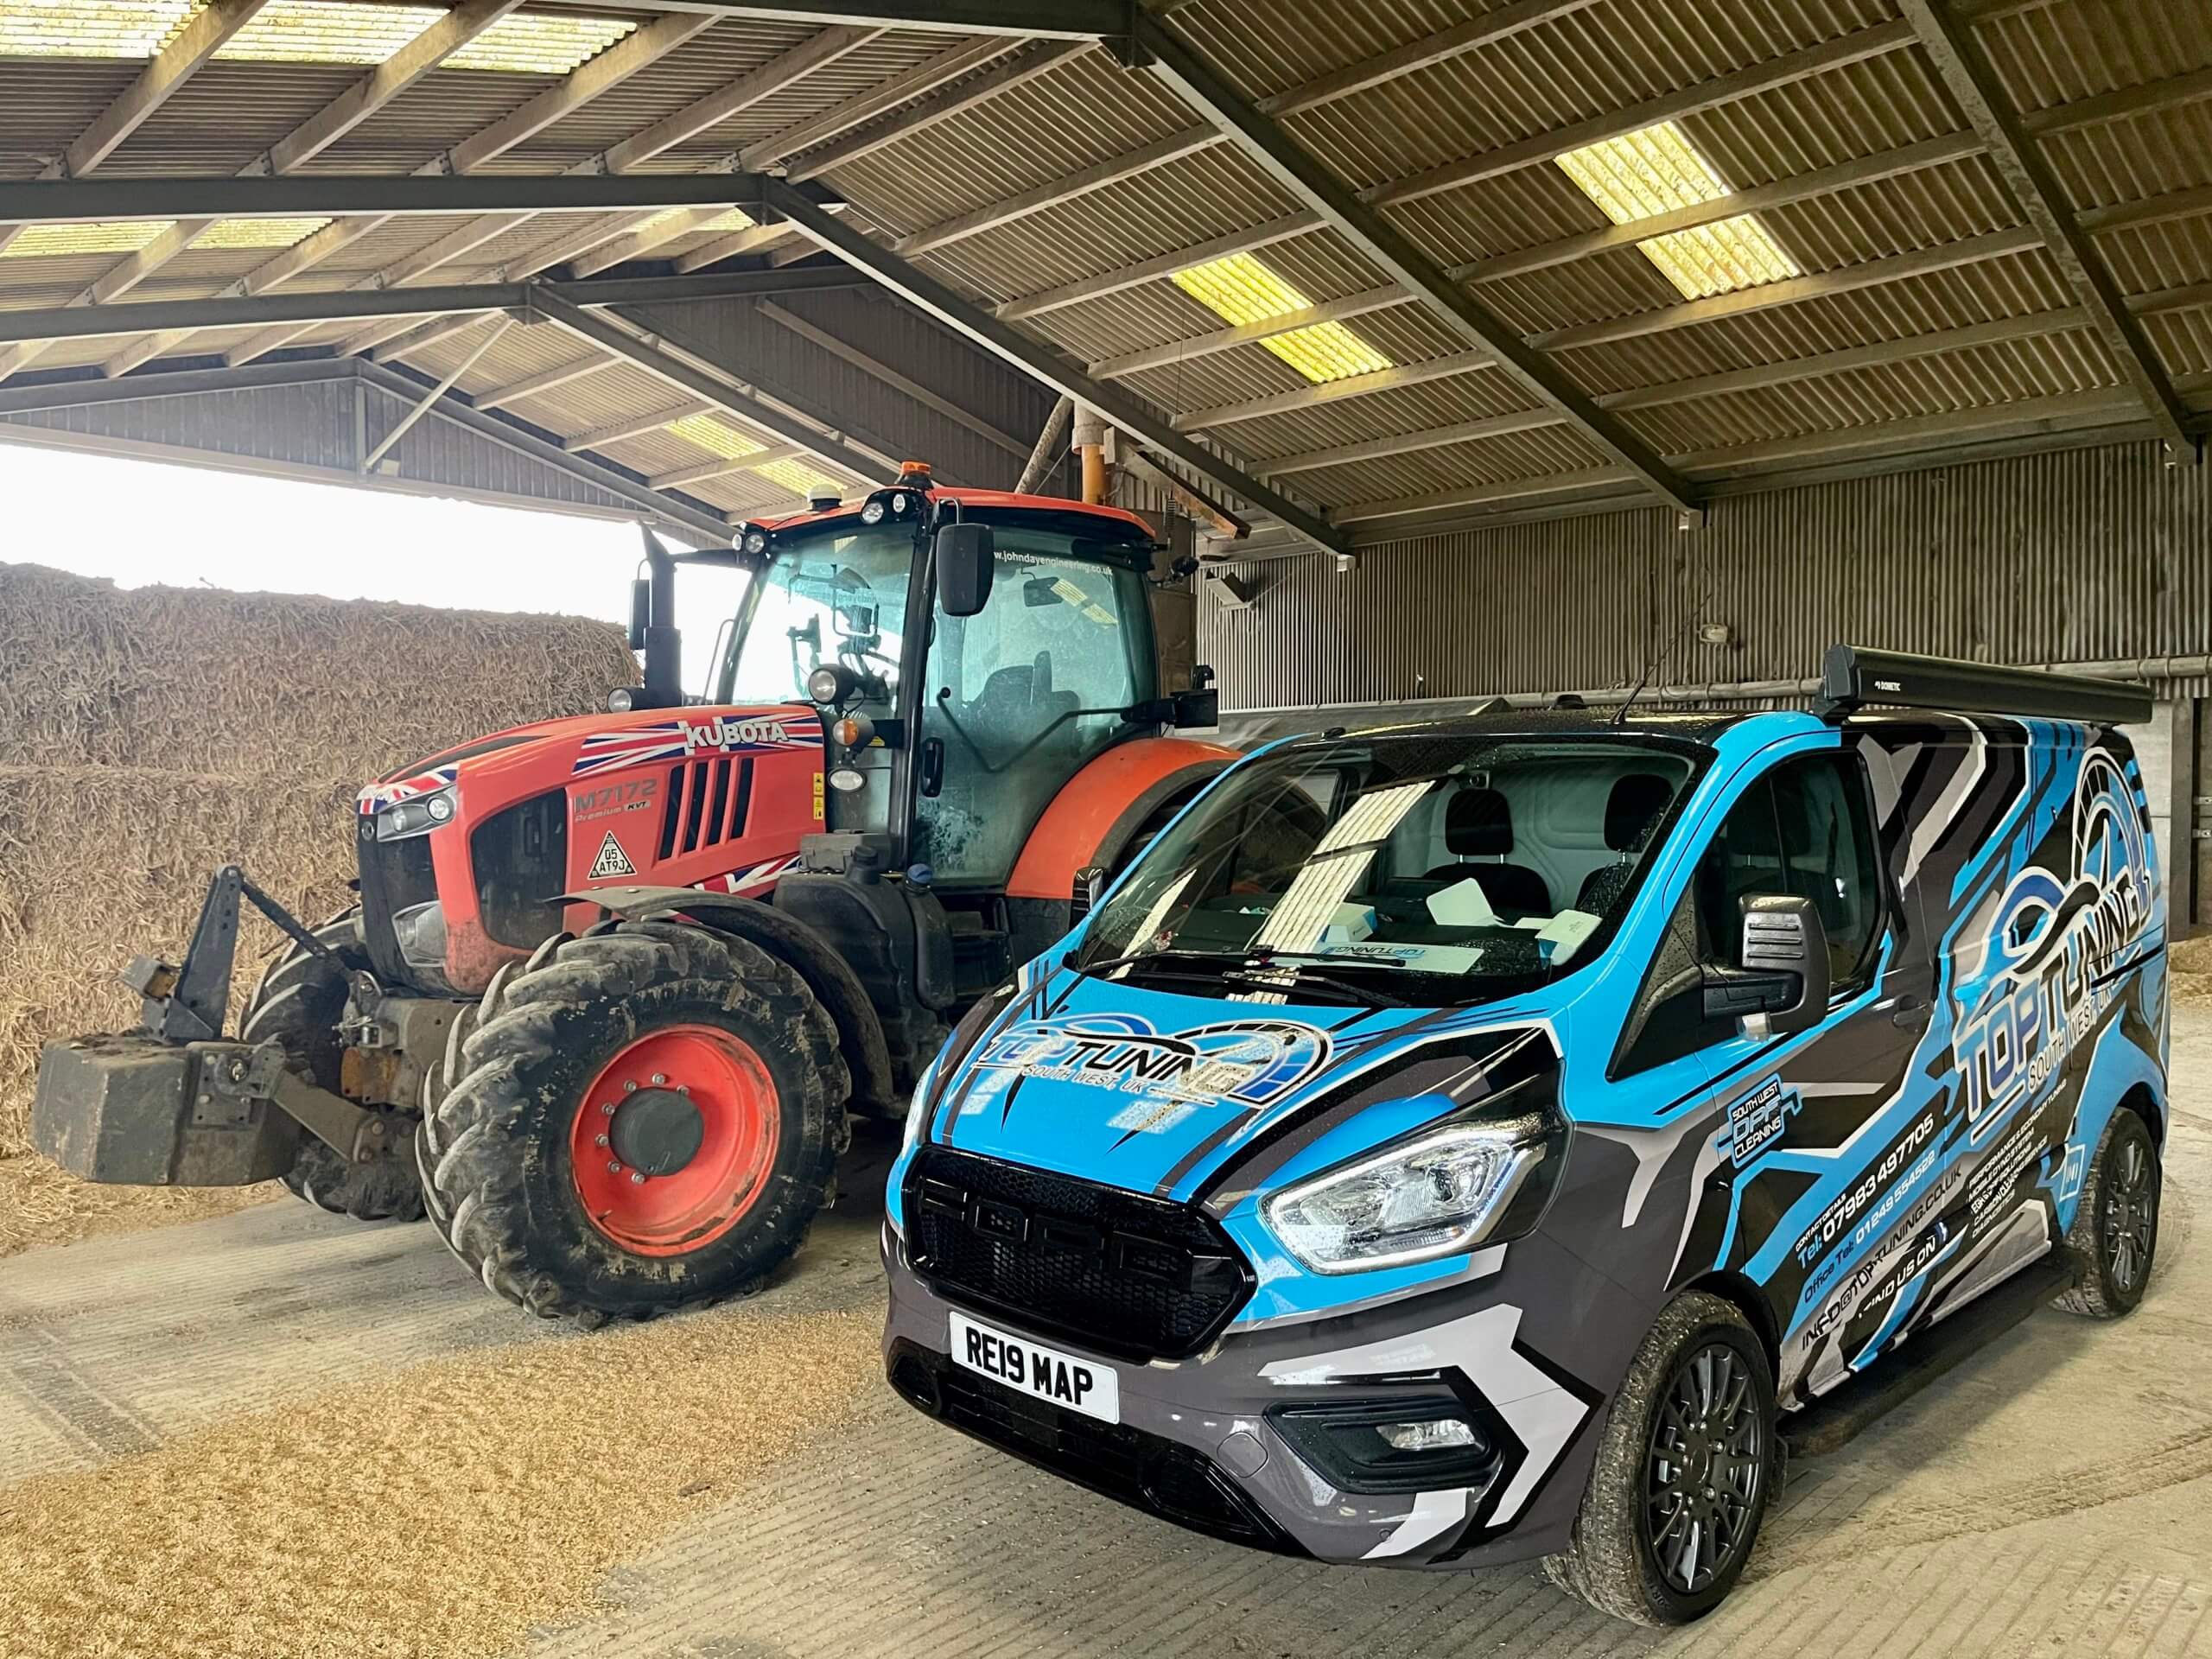 Tractor Tuning throughout the South West